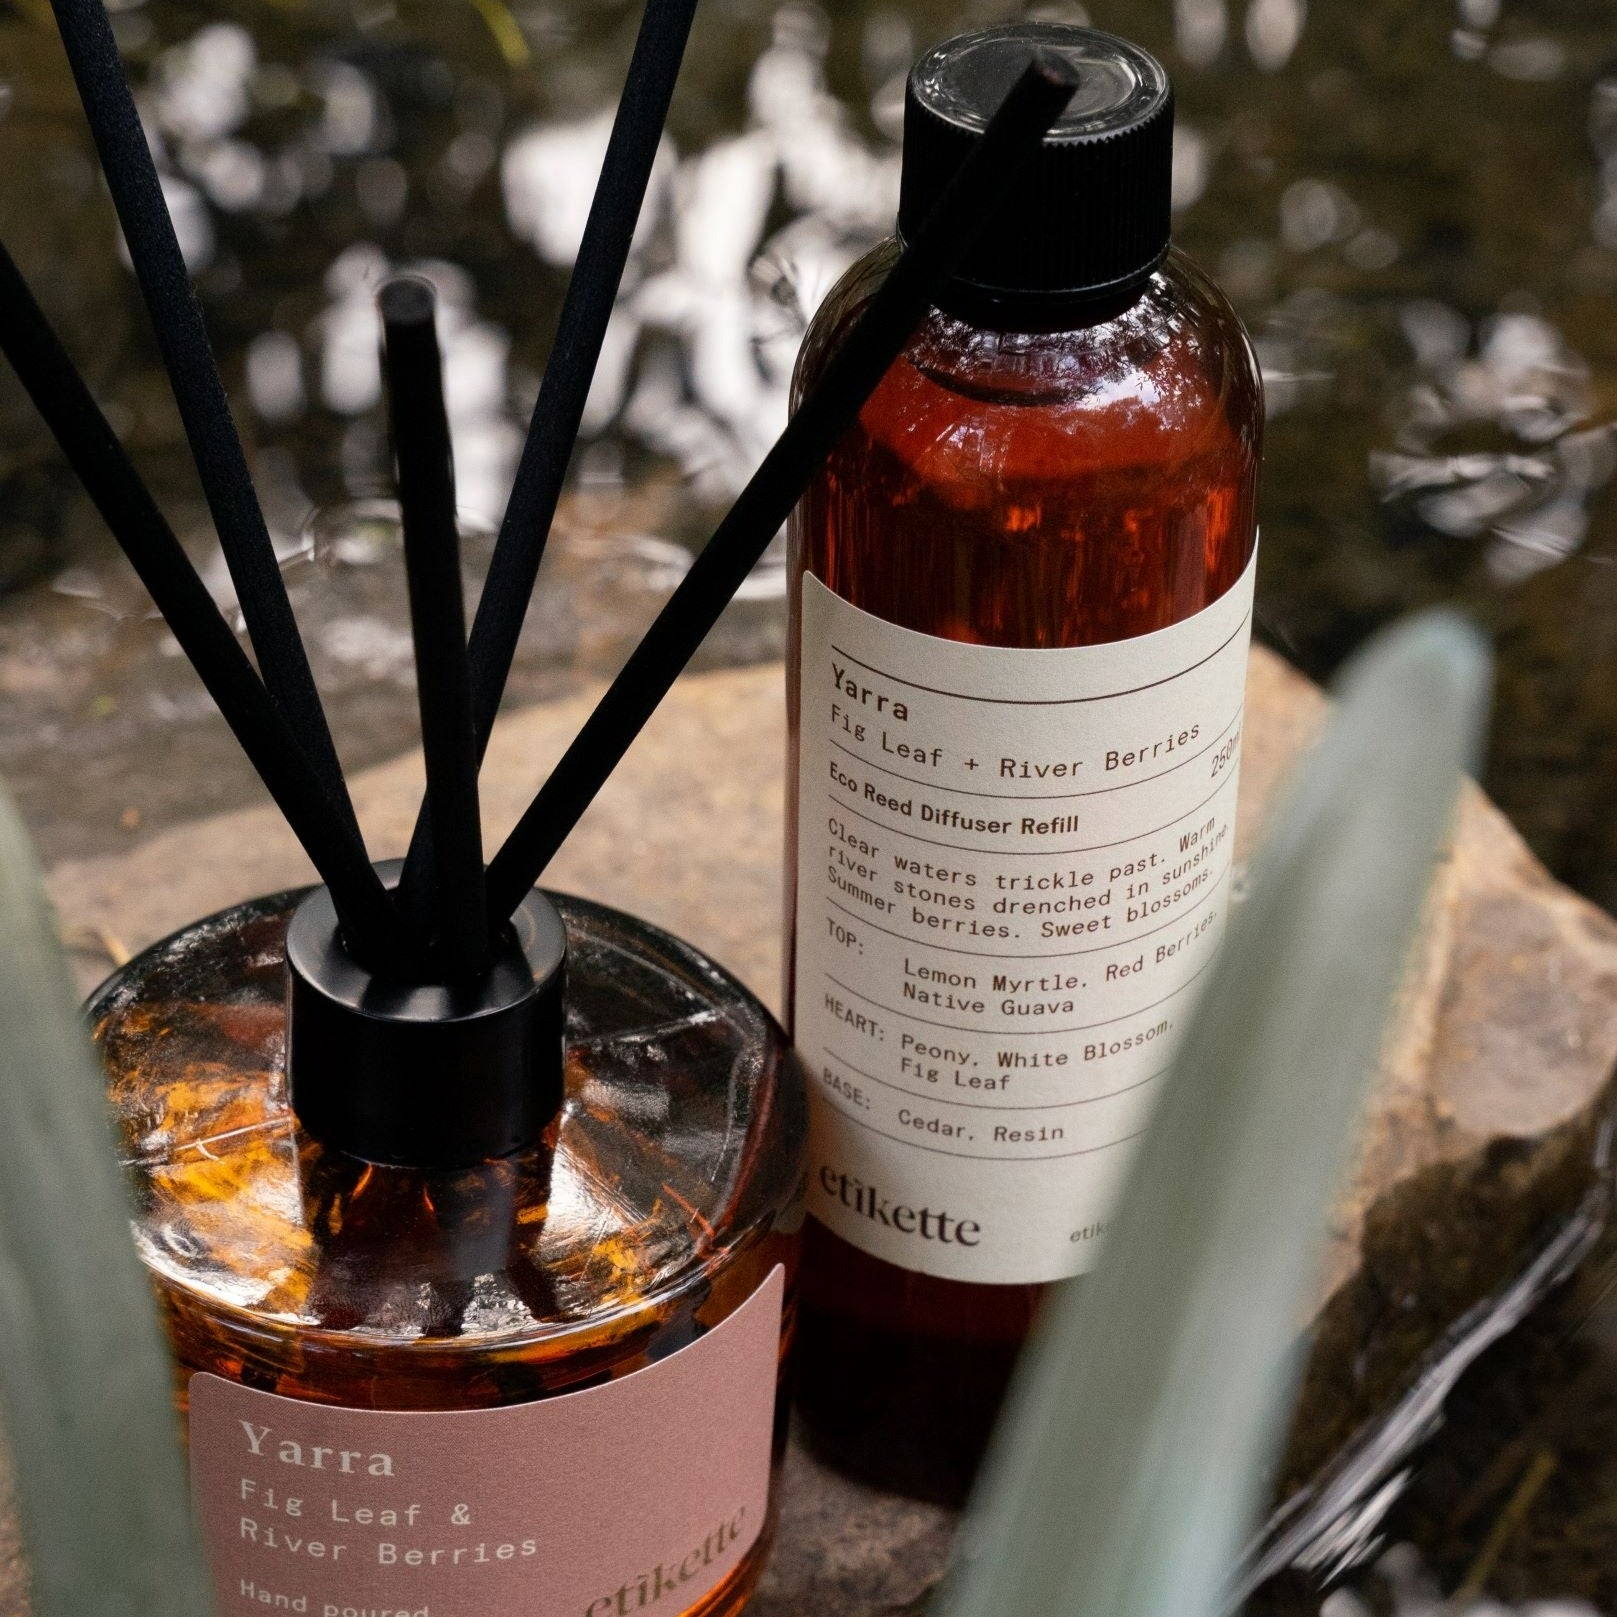 Eco Reed Diffuser Refill ~ Yarra in Fig Leaf & River Berries